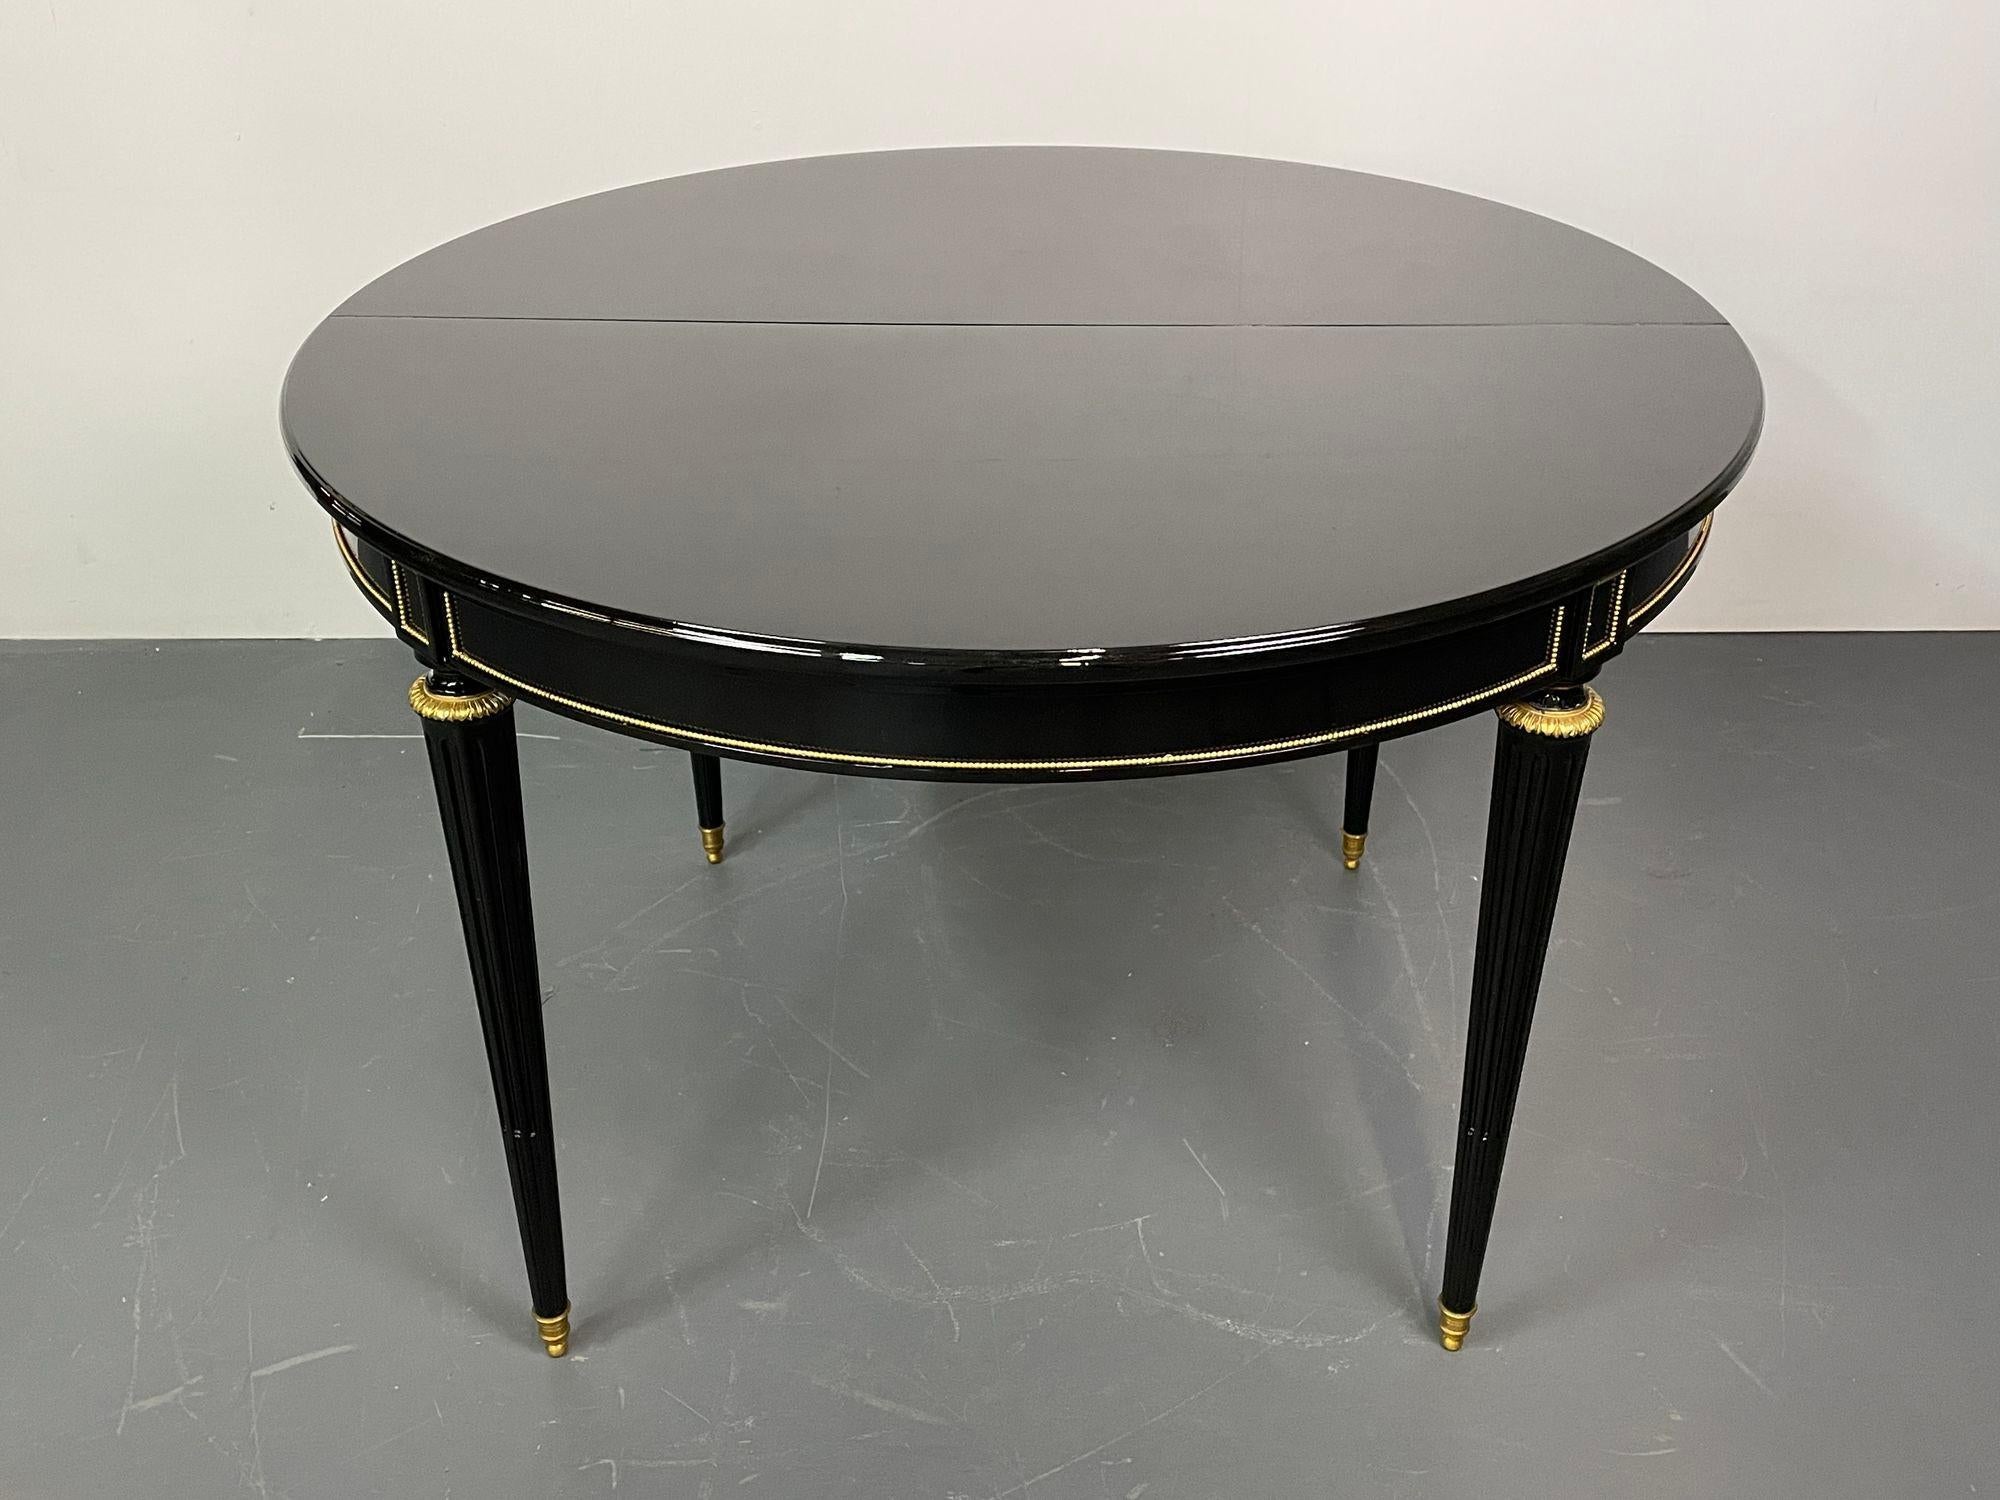 French Maison Gouffé Hollywood Regency Dining Table, Ebony Lacquer, Bronze, Paris 1930s For Sale